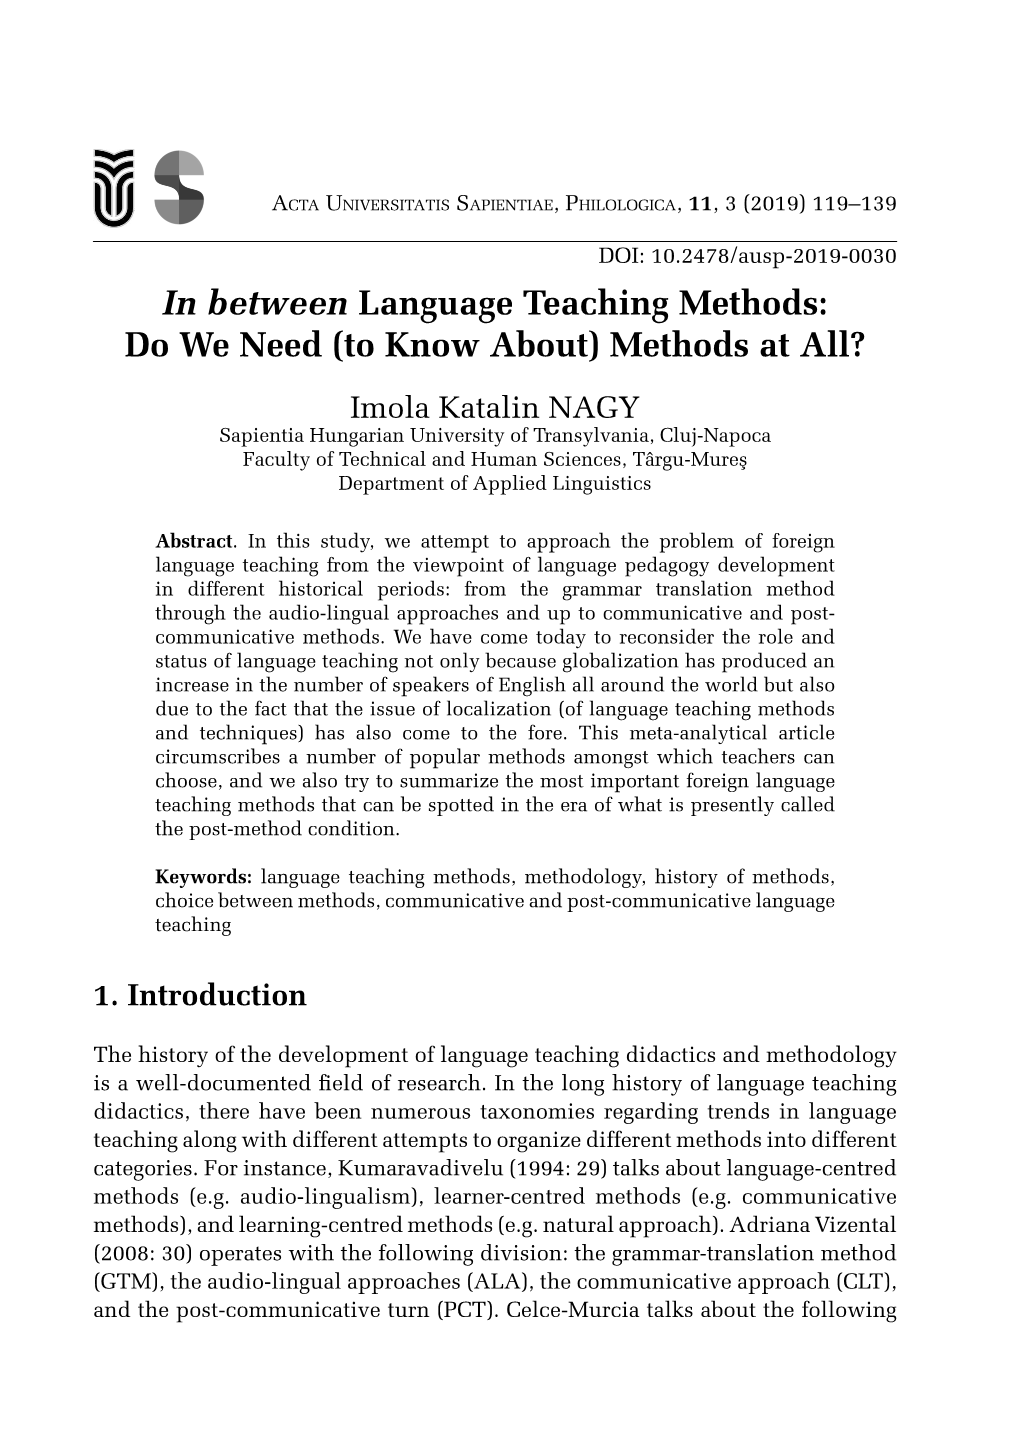 In Between Language Teaching Methods: Do We Need (To Know About)